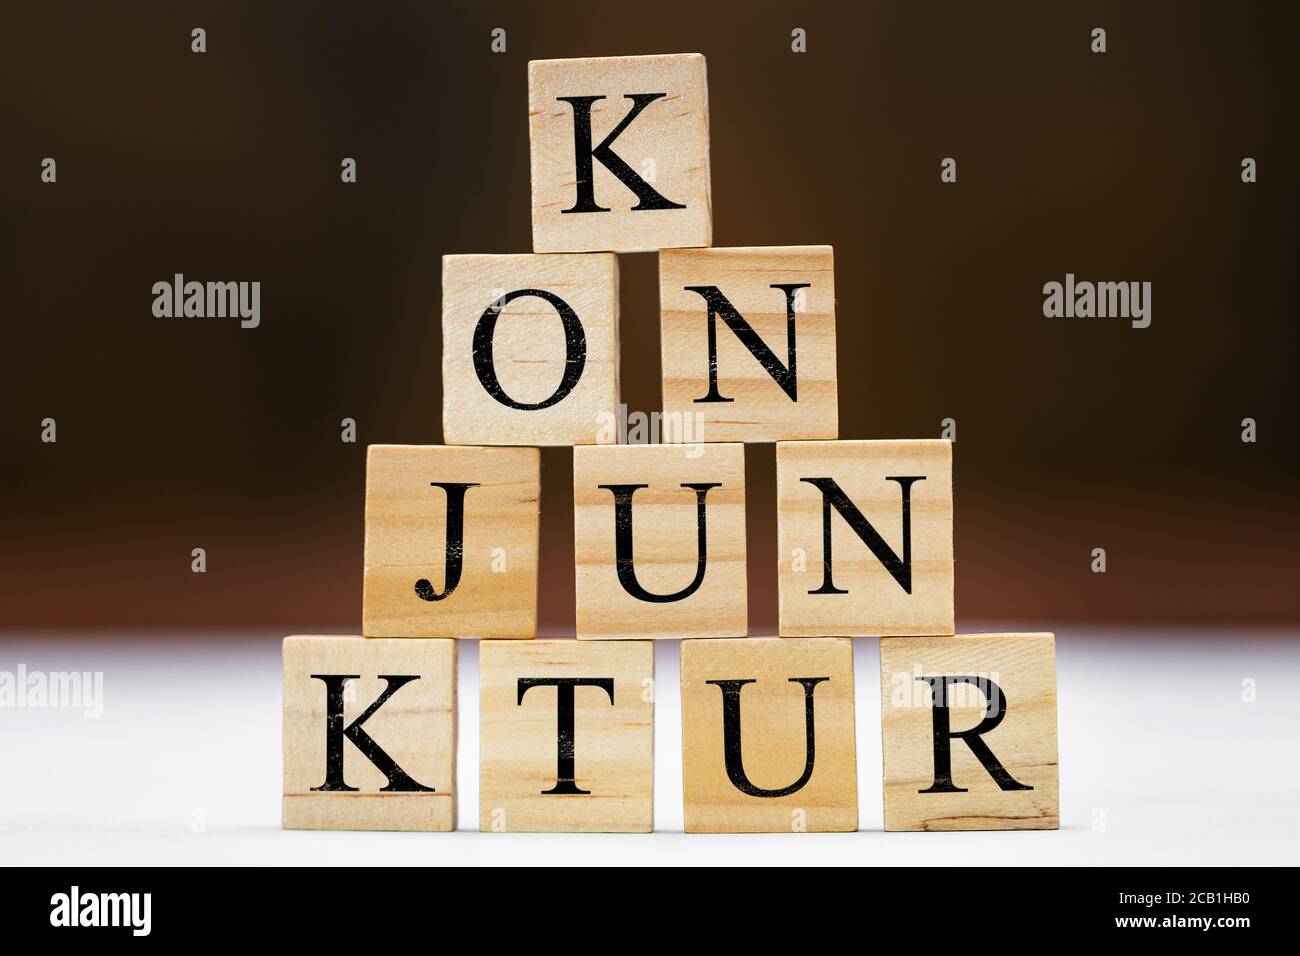 Wooden blocks with german word konjunktur with means conjuncture, stumulus package and finance Stock Photo